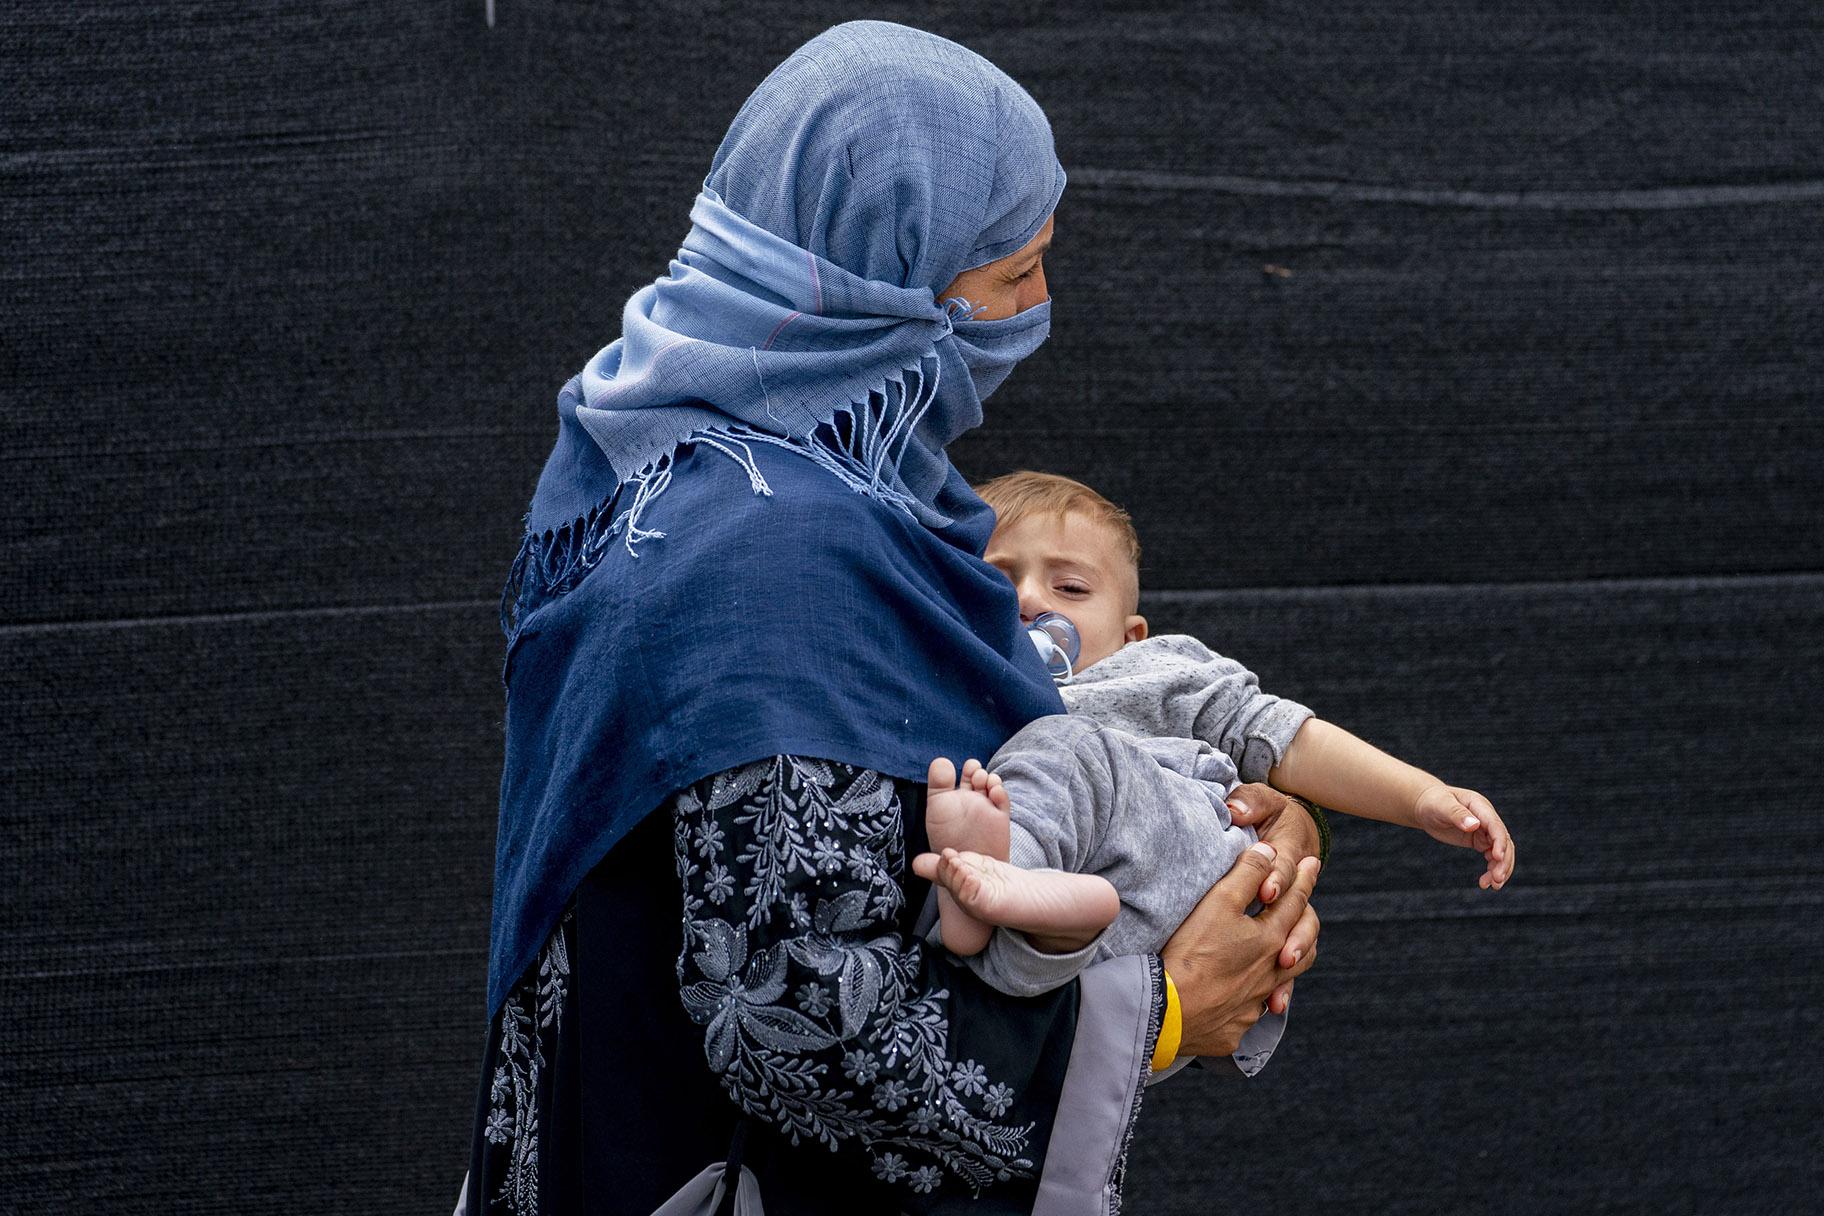 A woman evacuated from Afghanistan steps off a bus with a baby as they arrive at a processing center in Chantilly, Monday, Aug. 23, 2021, after arriving on a flight at Dulles International Airport. (AP Photo / Andrew Harnik)